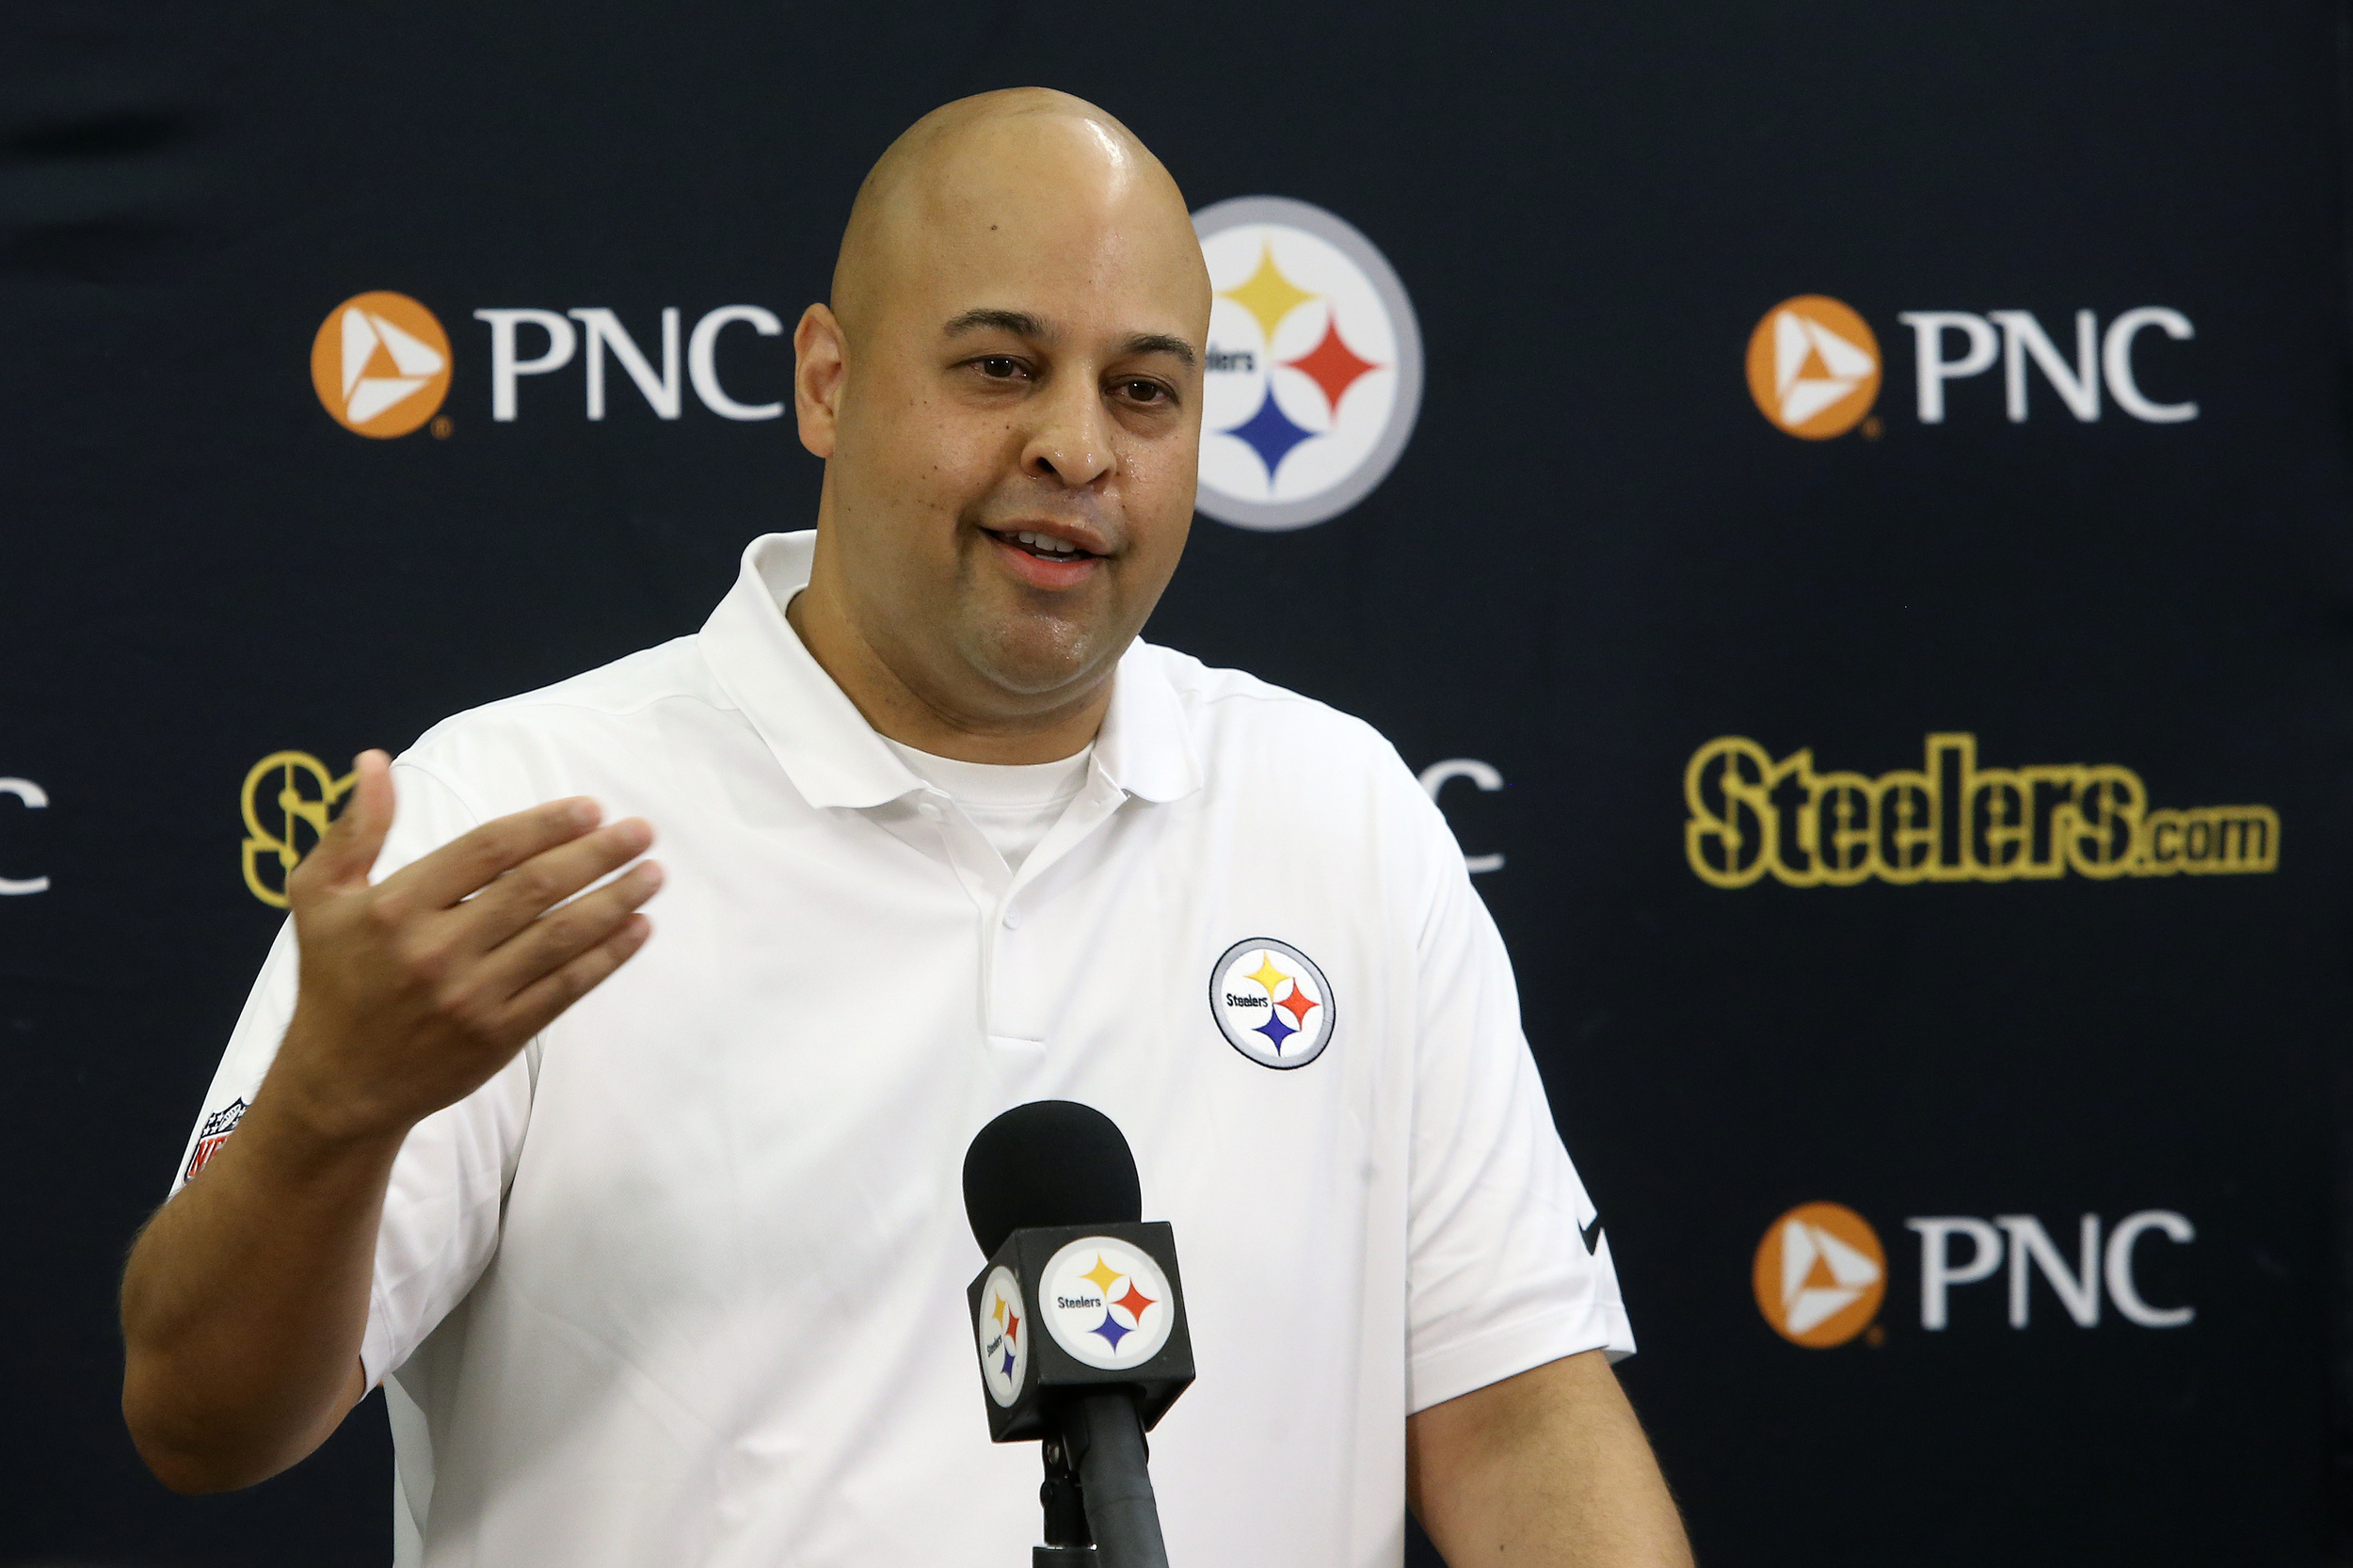 steelers vision for the future becoming clear as khan puts stamp on team